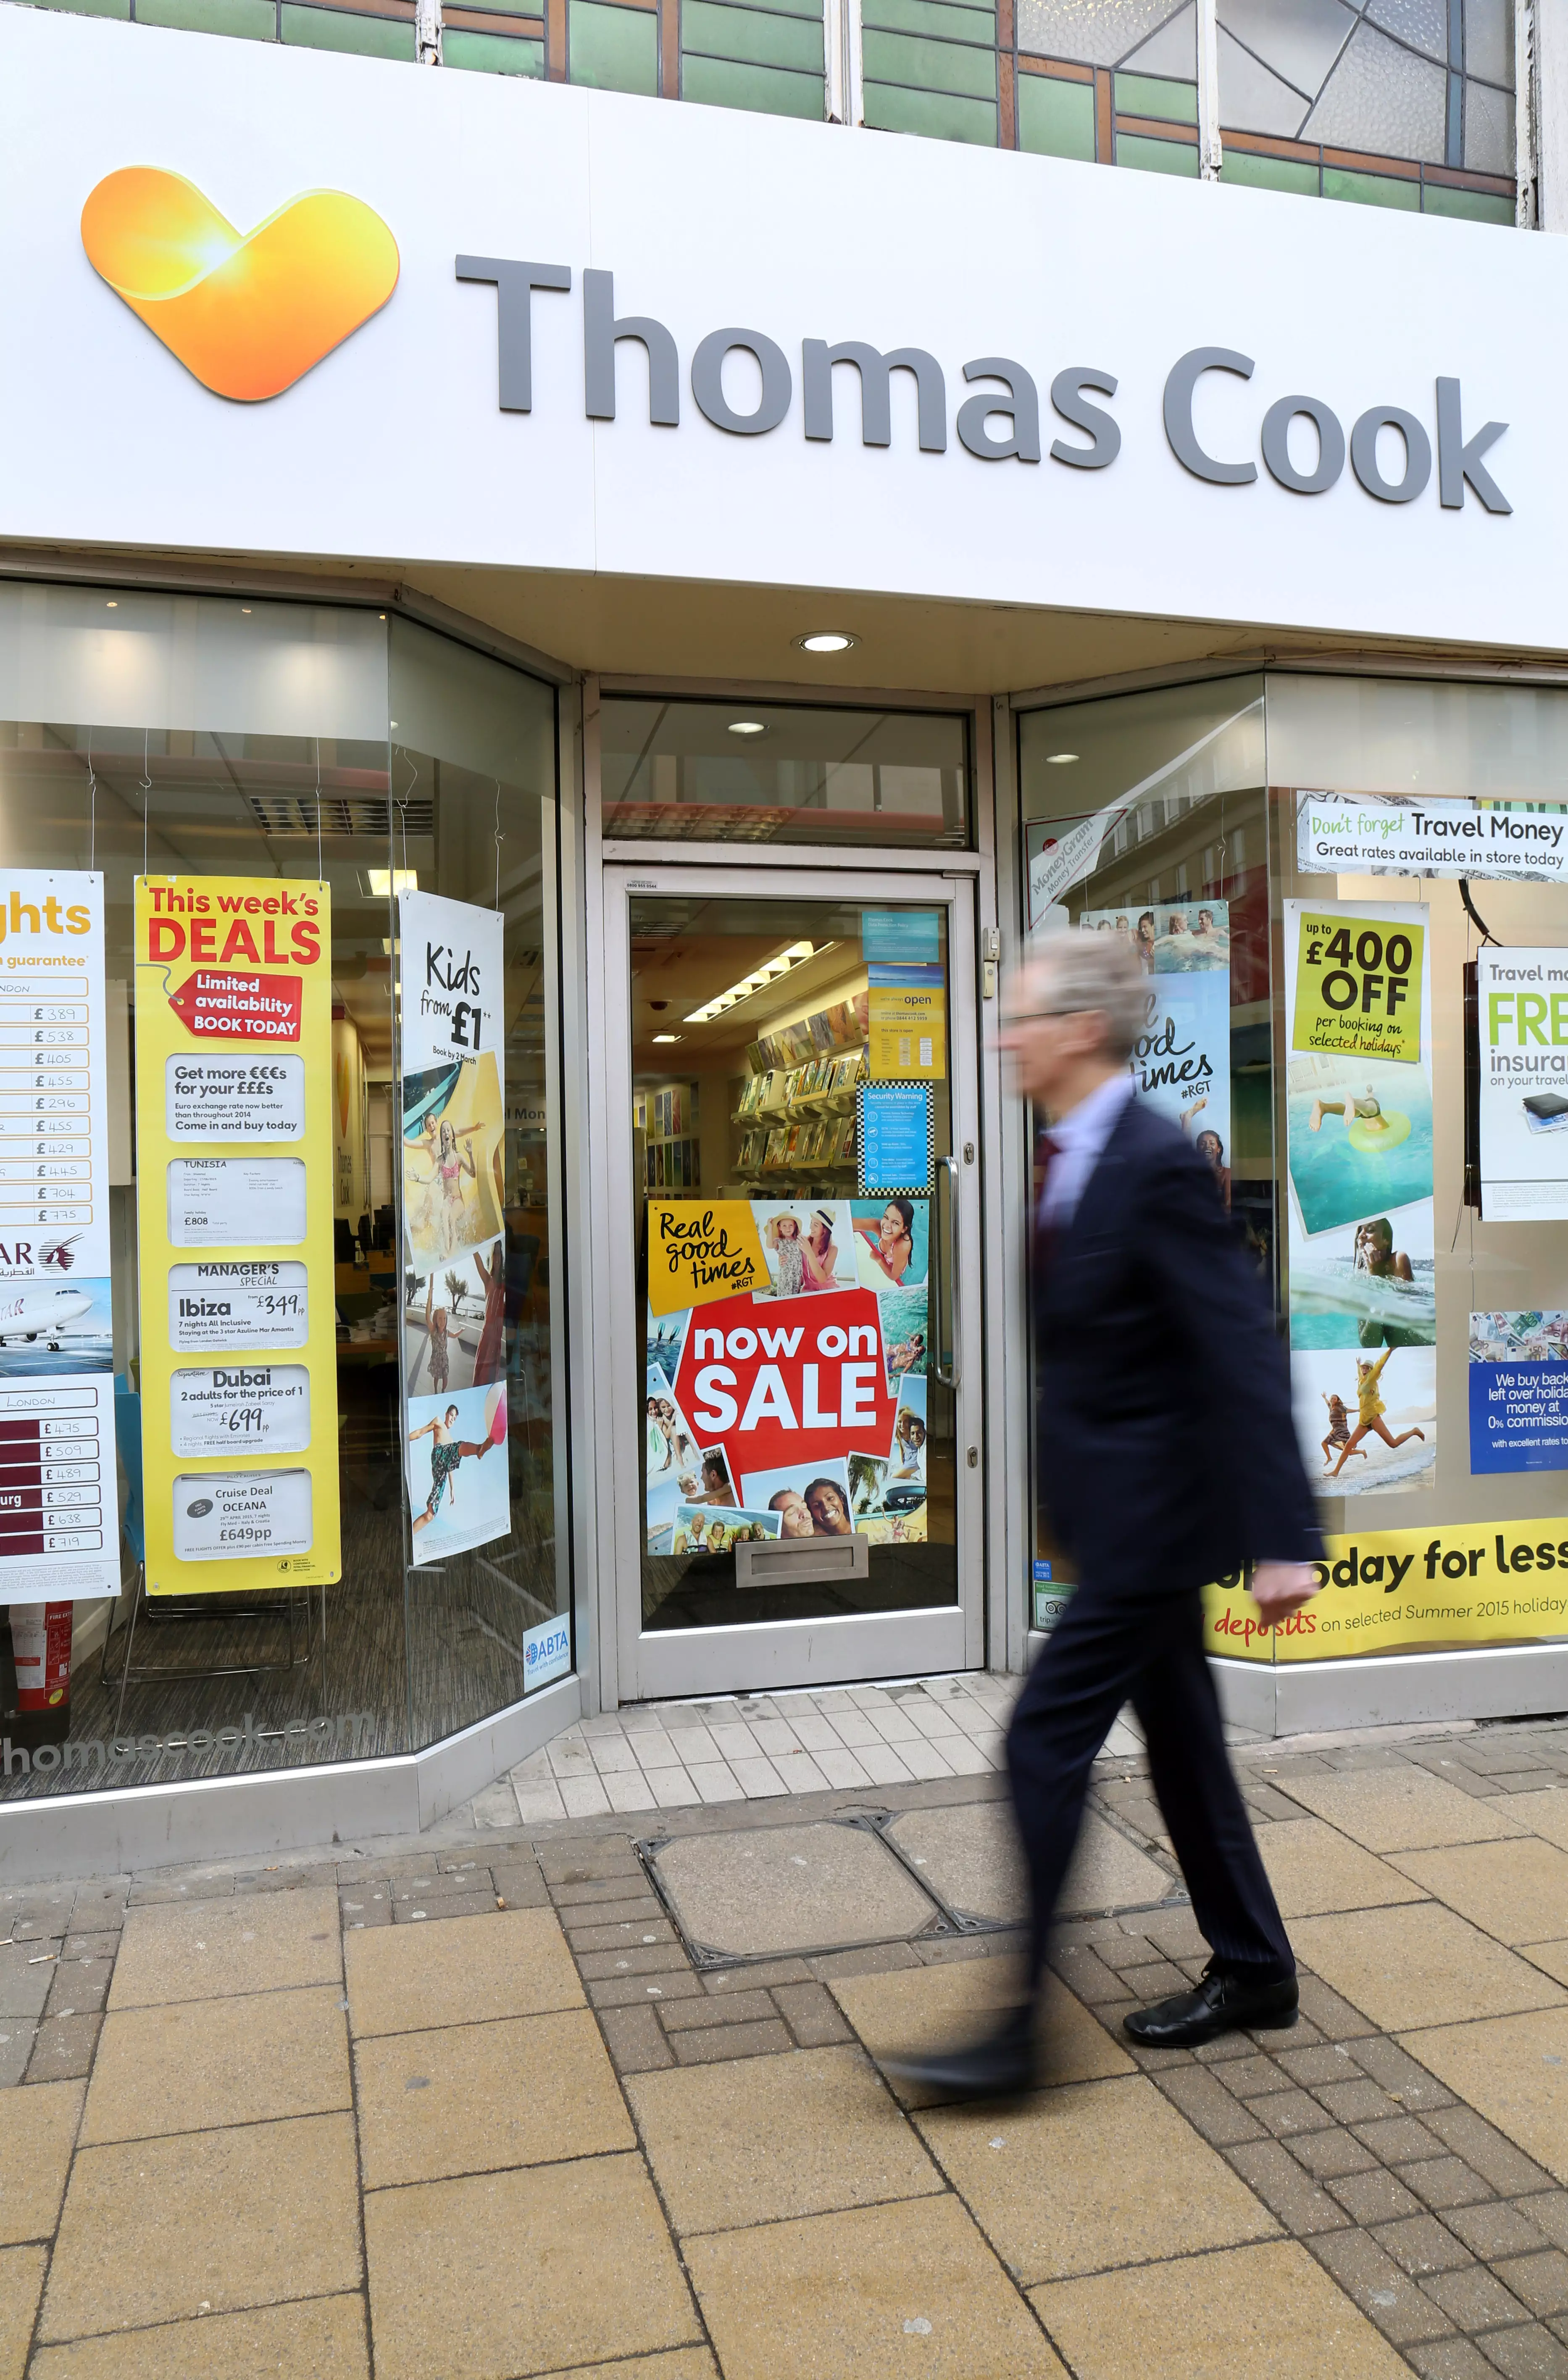 Thomas Cook is one of the few travel firms to still have high street stores.